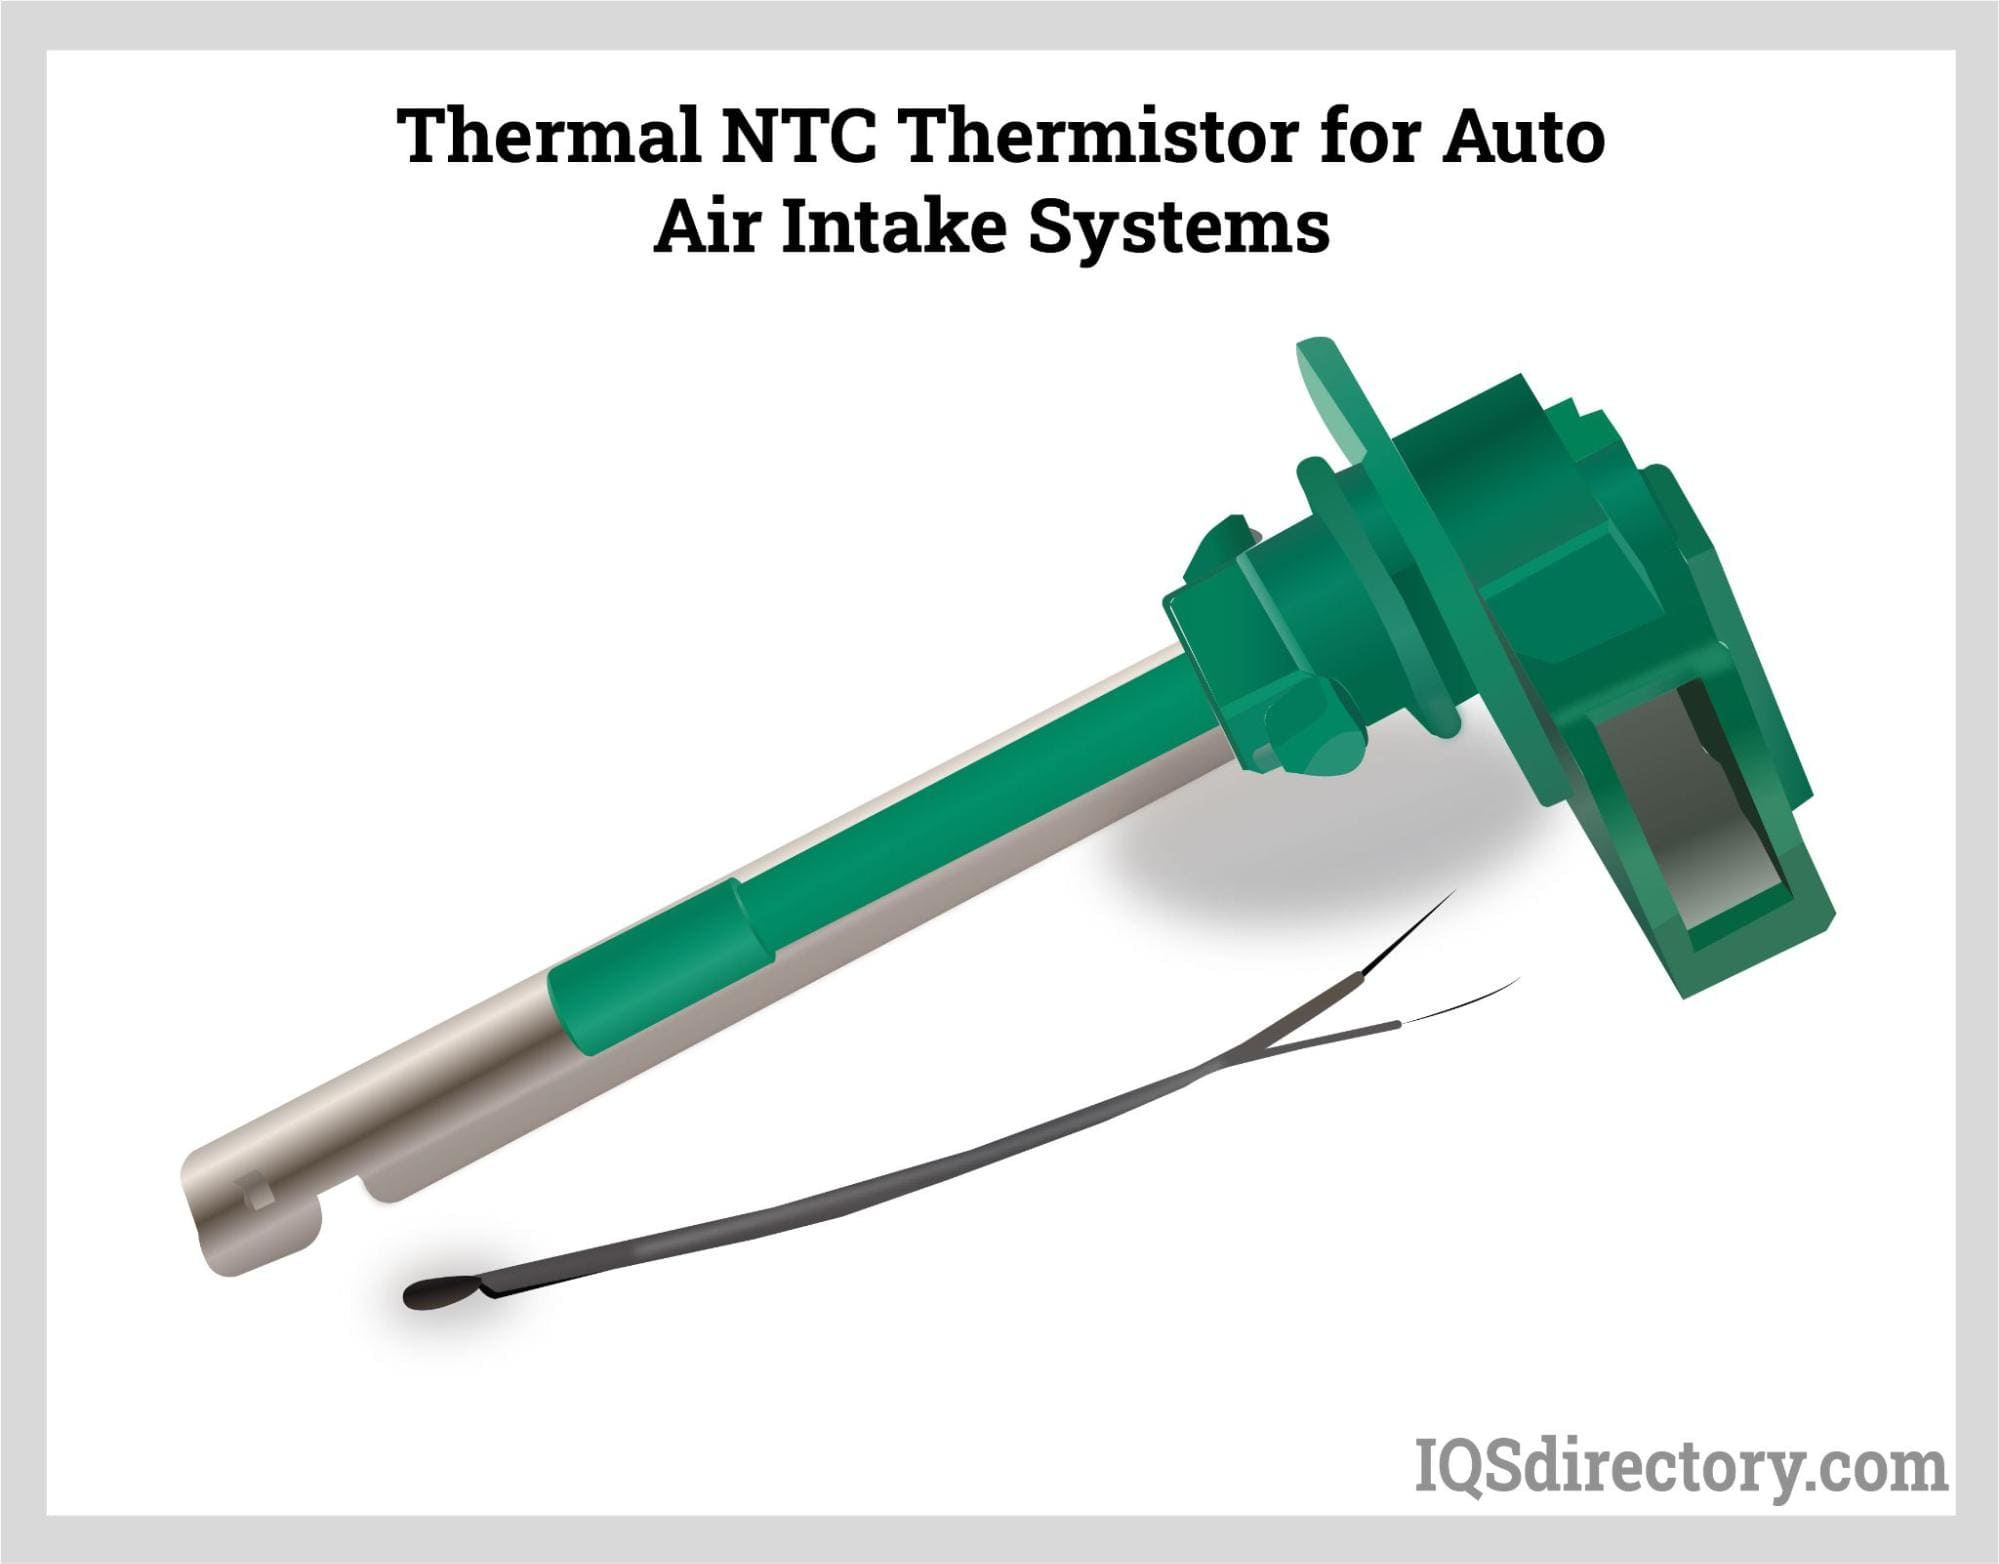 Thermal NTC Thermistor for Auto Air Intake Systems